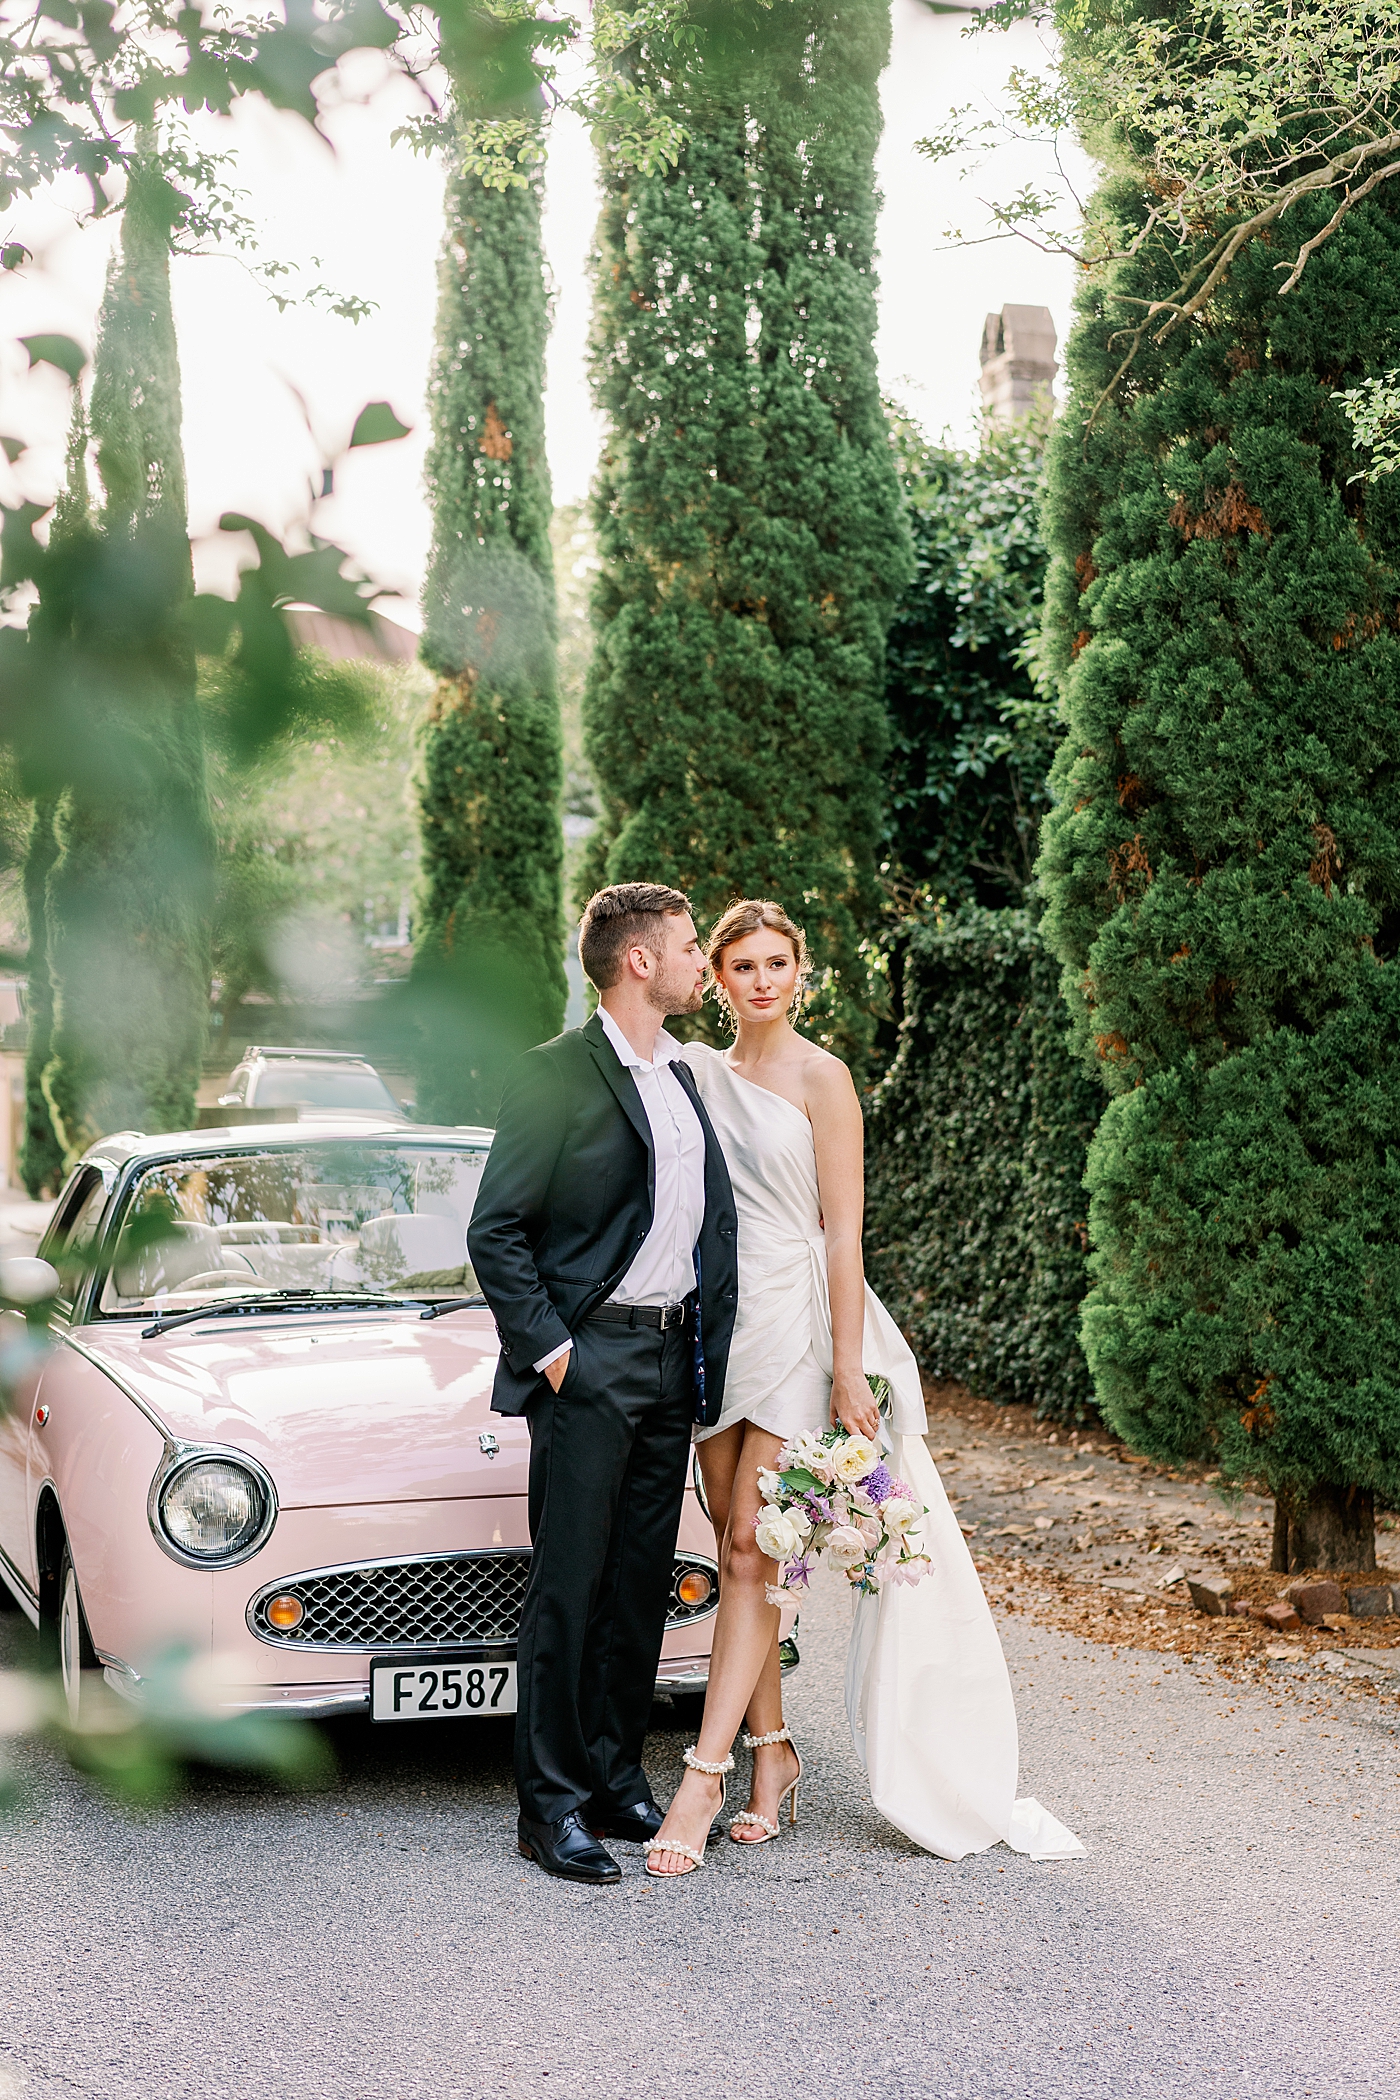 Bride and groom posing near pink car during Elevated City Hall Elopement | Images by Annie Laura Photo